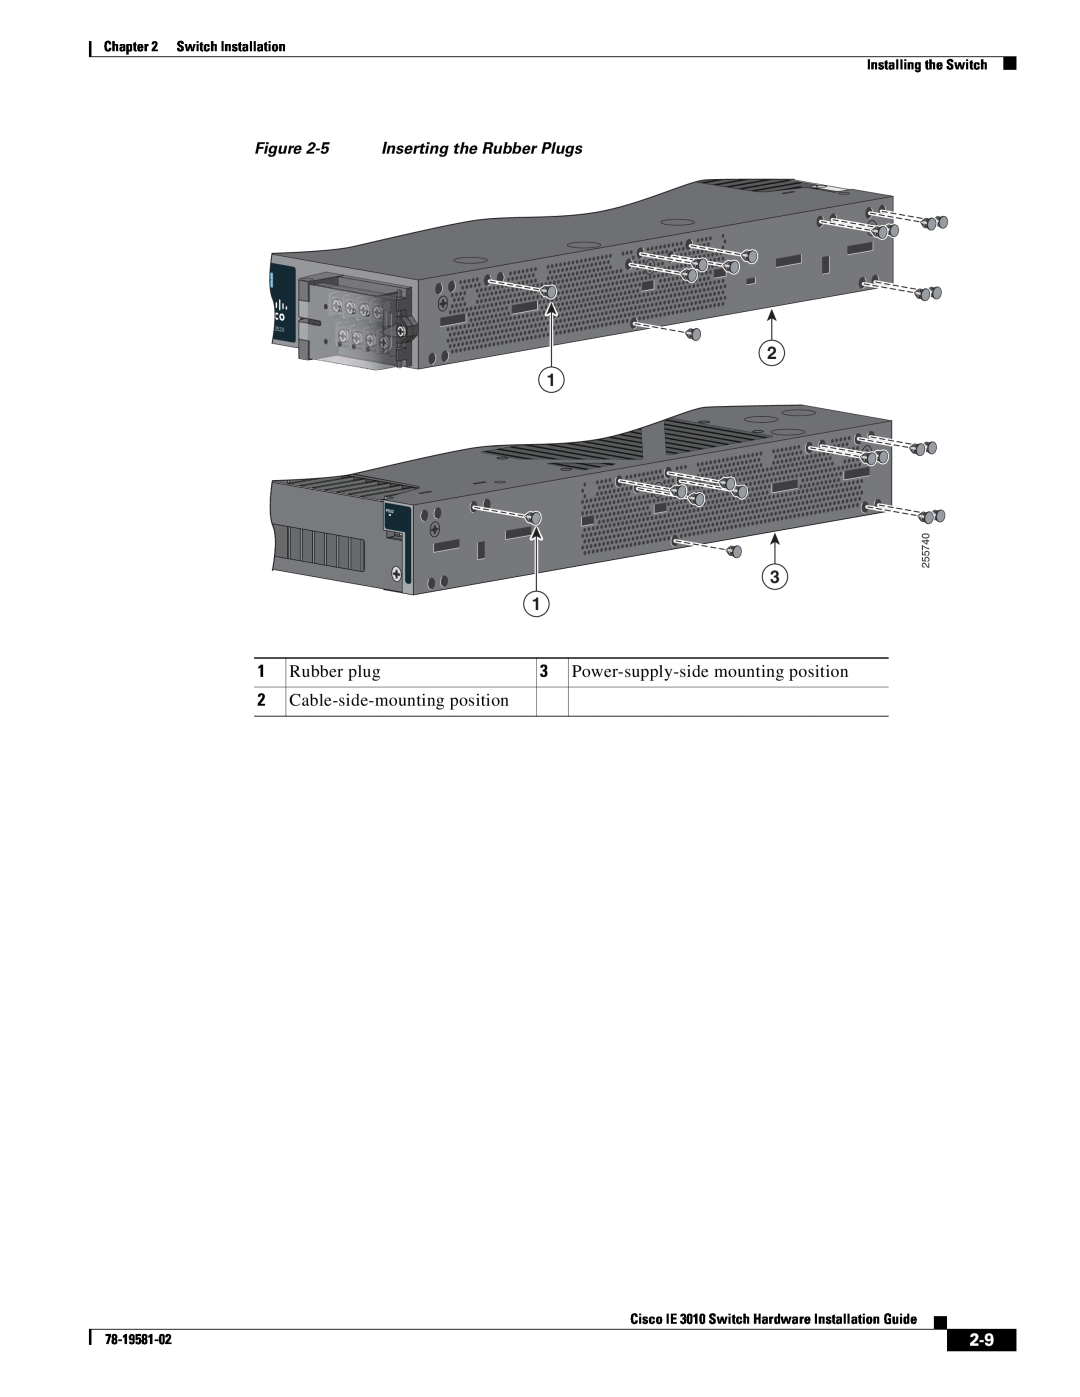 Cisco Systems IE3010 manual 5 Inserting the Rubber Plugs, Switch Installation Installing the Switch, 78-19581-02, 255740 